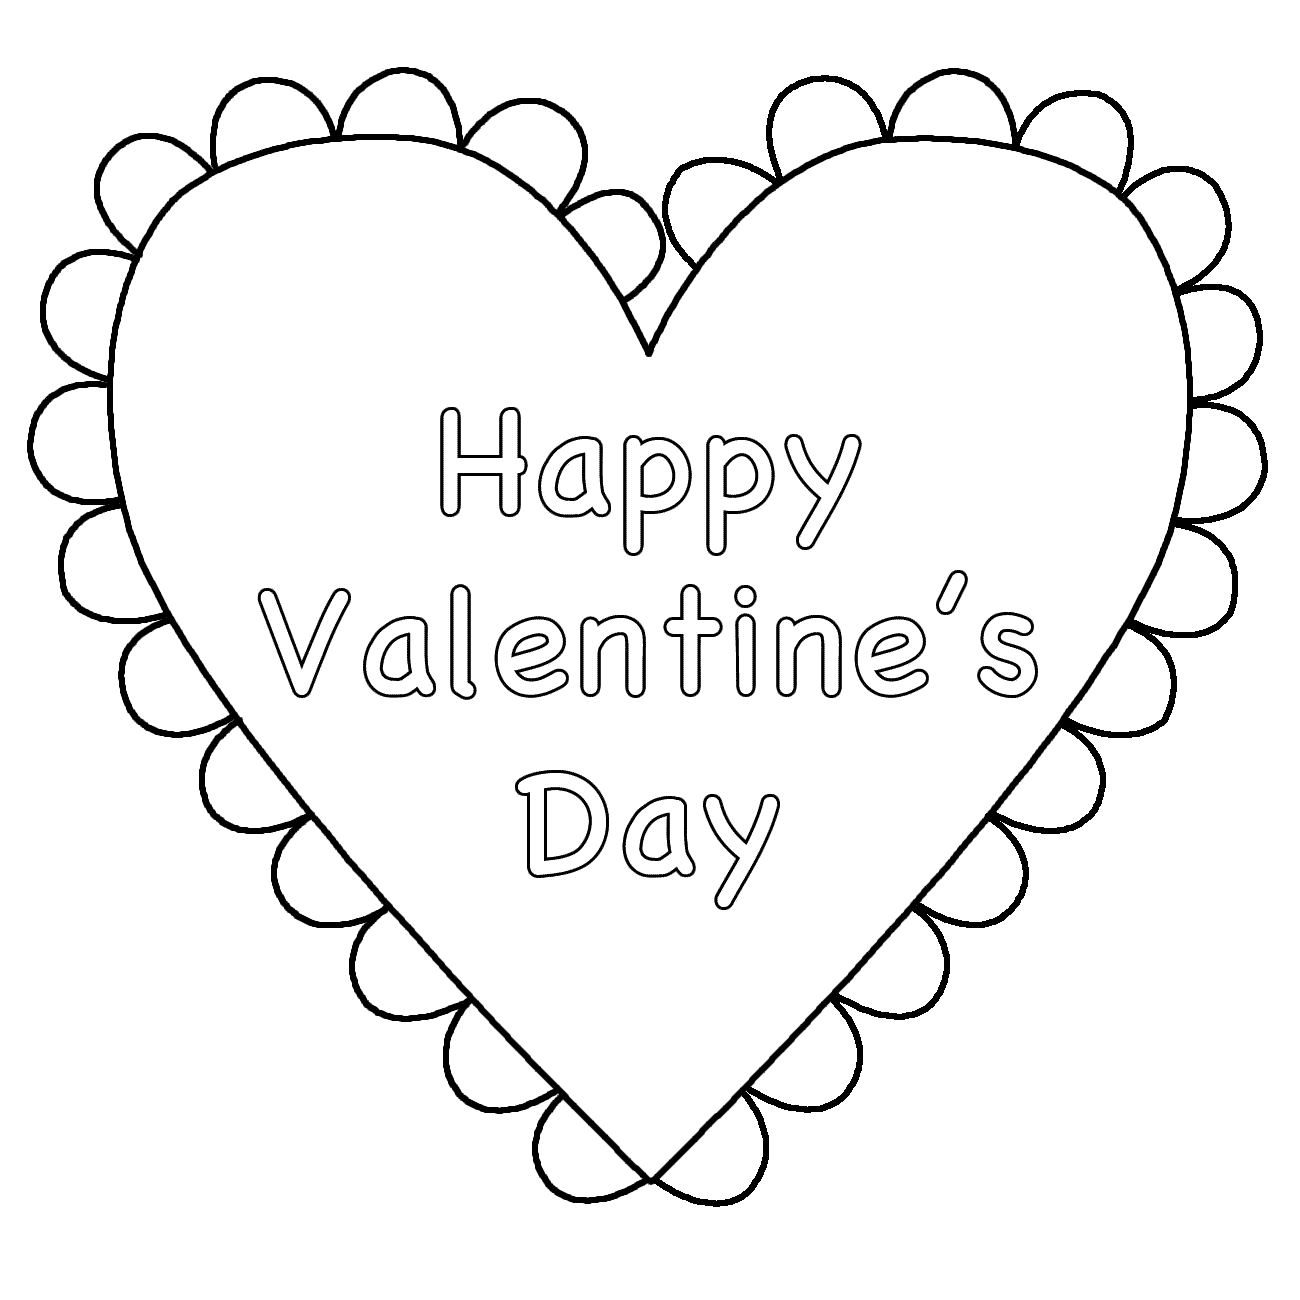 Download Coloring Pages: Hearts Free Printable Coloring Pages for Valentine's Day